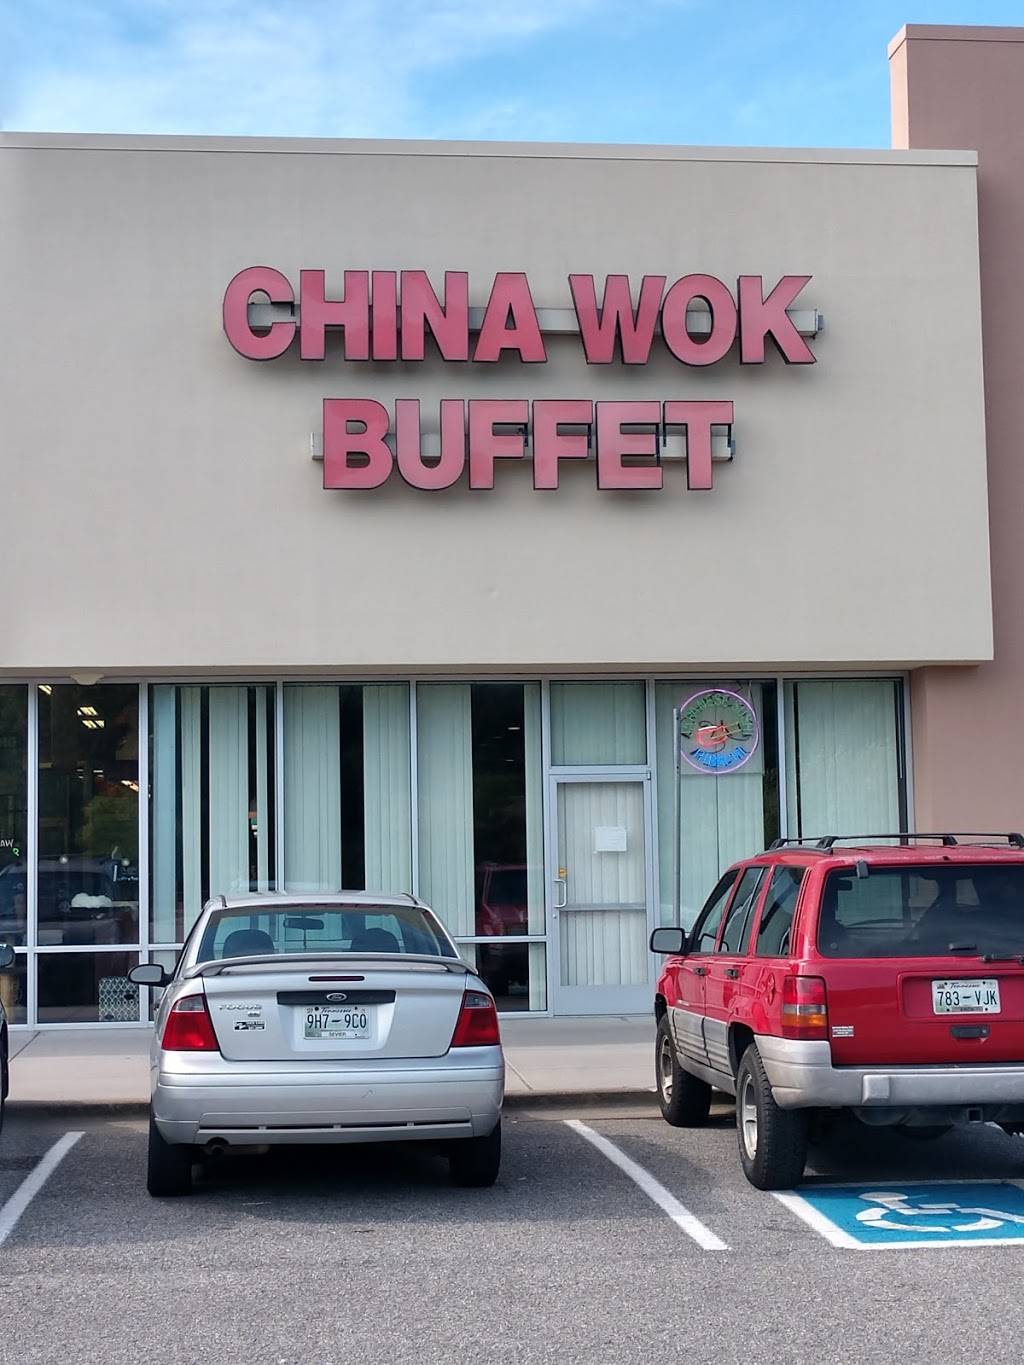 Fa1a63dc7fbb1997729050b6b848c04c  United States Tennessee Knox County Knoxville China Wok Buffet 865 546 0323htm 